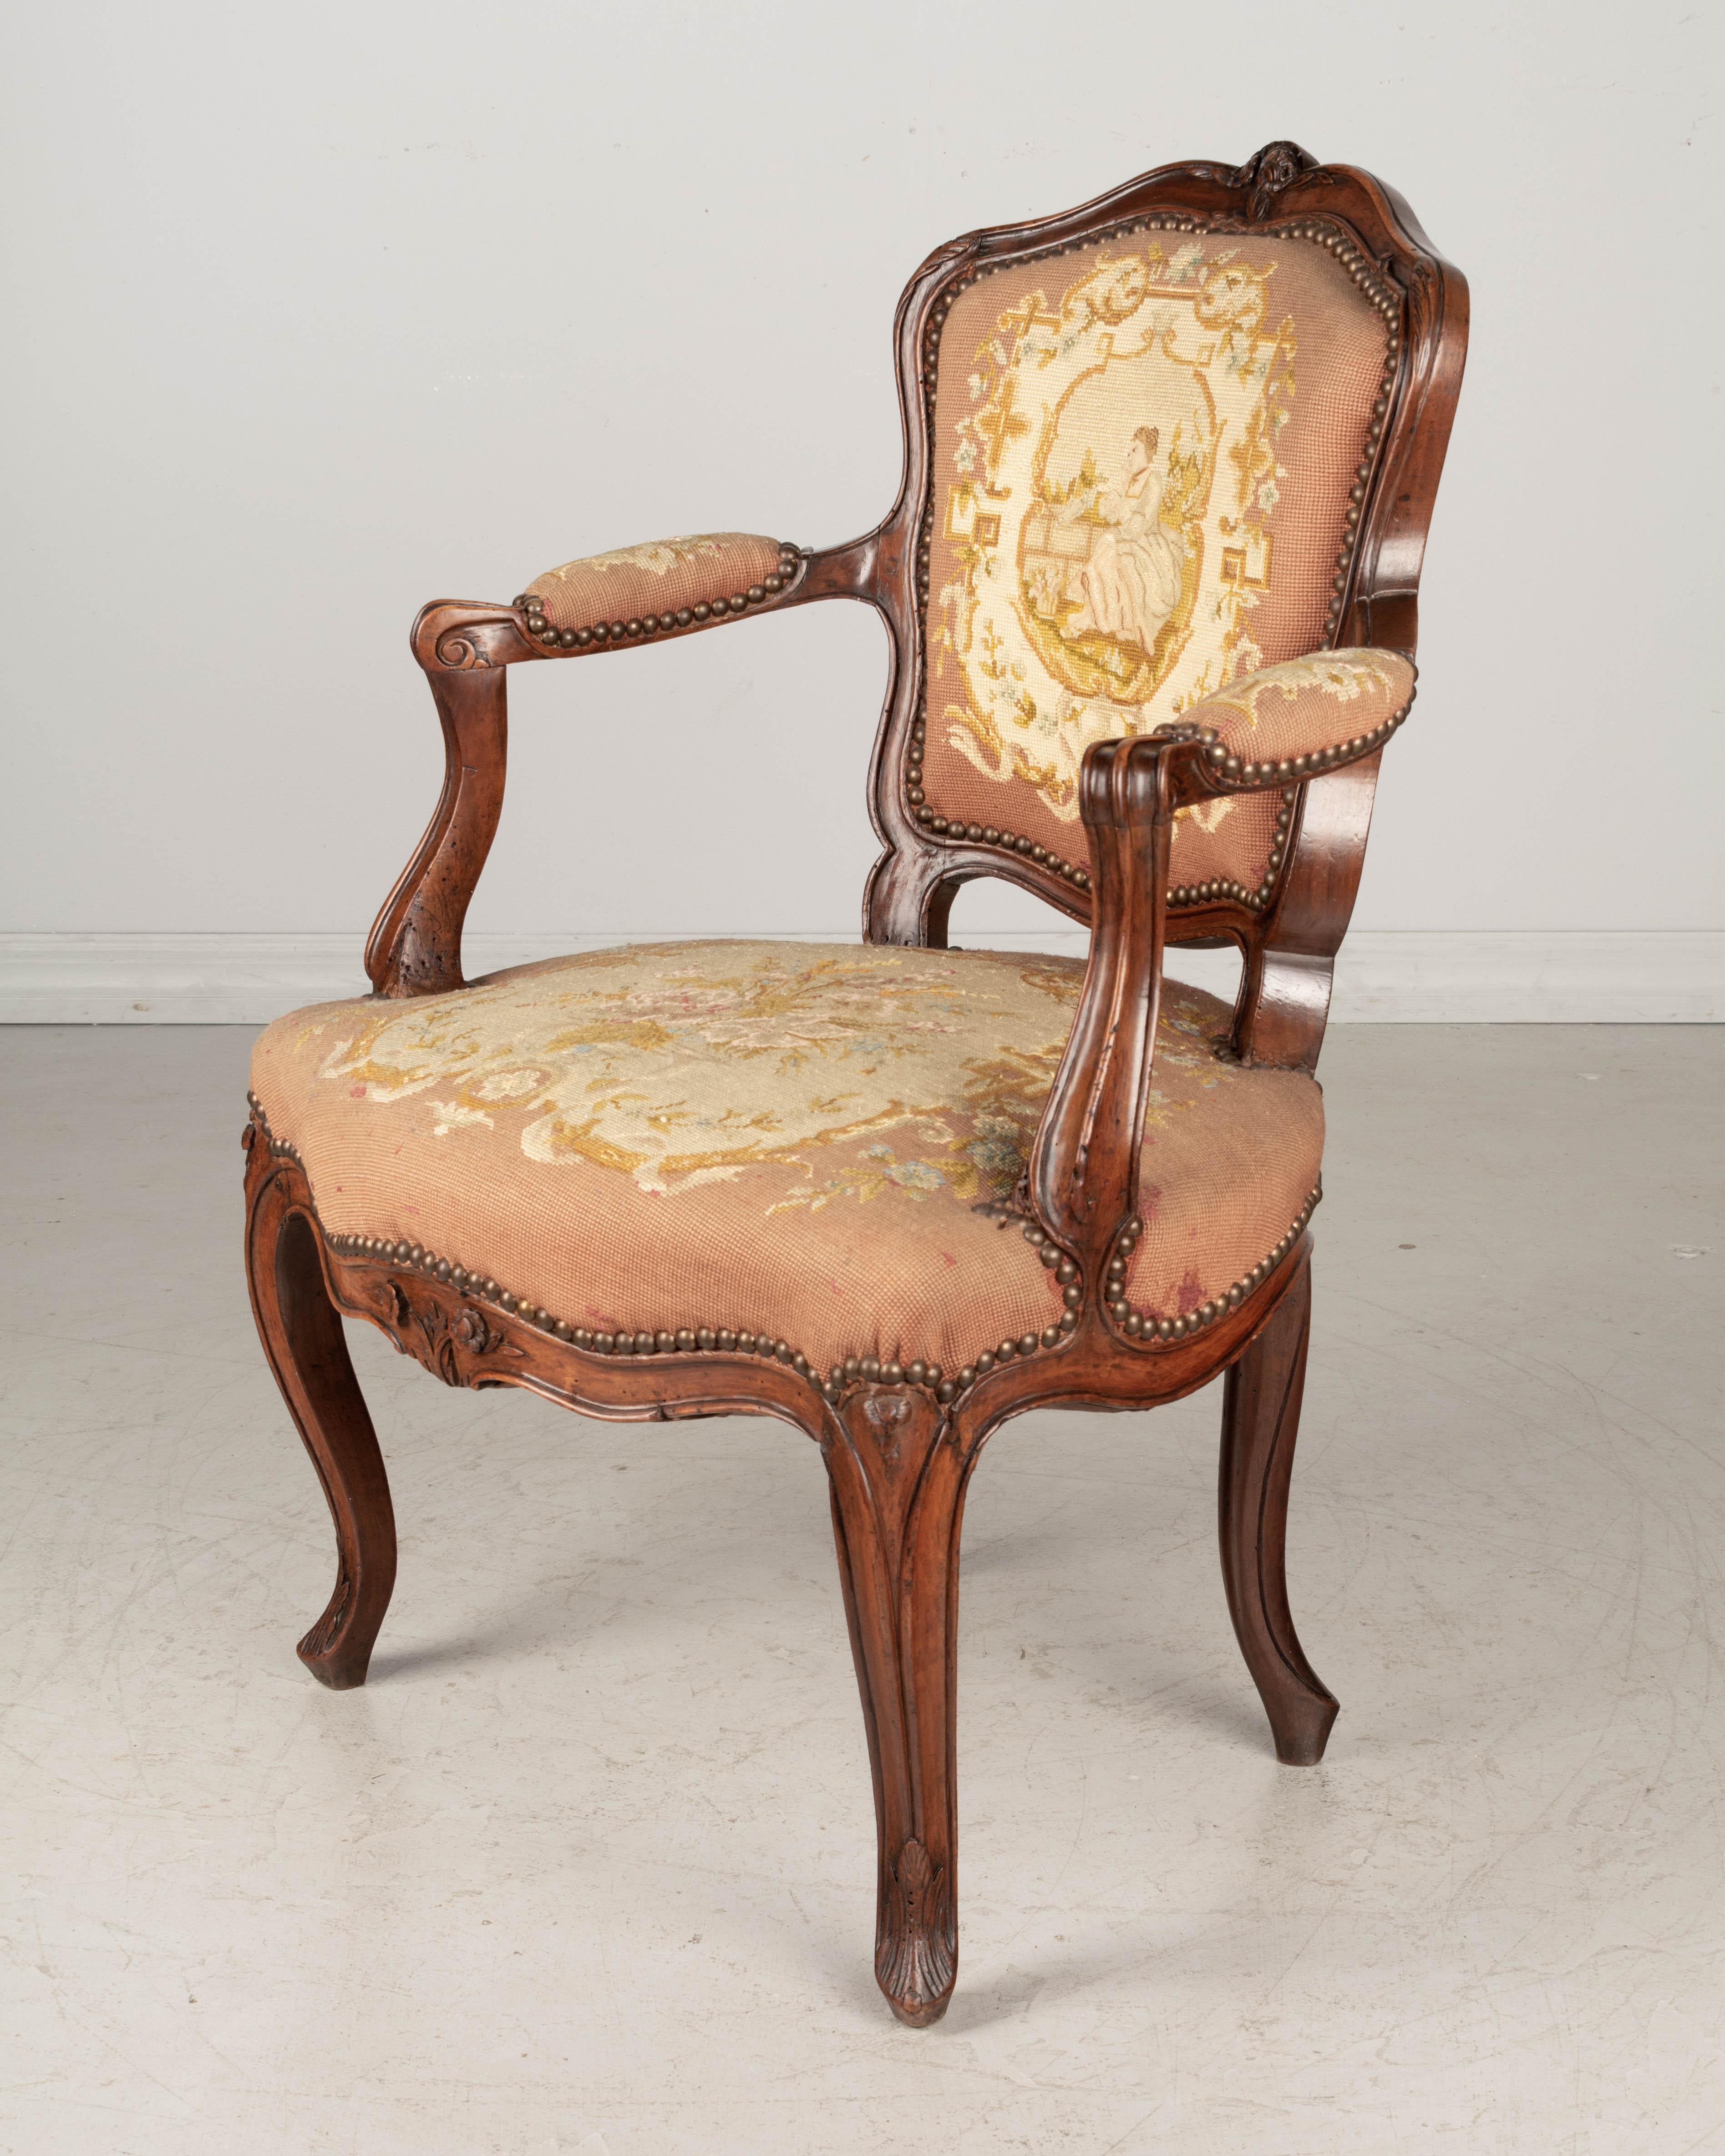 A small 18th century Louis XV French fauteuil, or armchair, with sturdy walnut frame and fine hand carved decoration. Upholstered in 19th century petit point tapestry. Pegged construction. This chair sits low to the ground with a seat height of 17